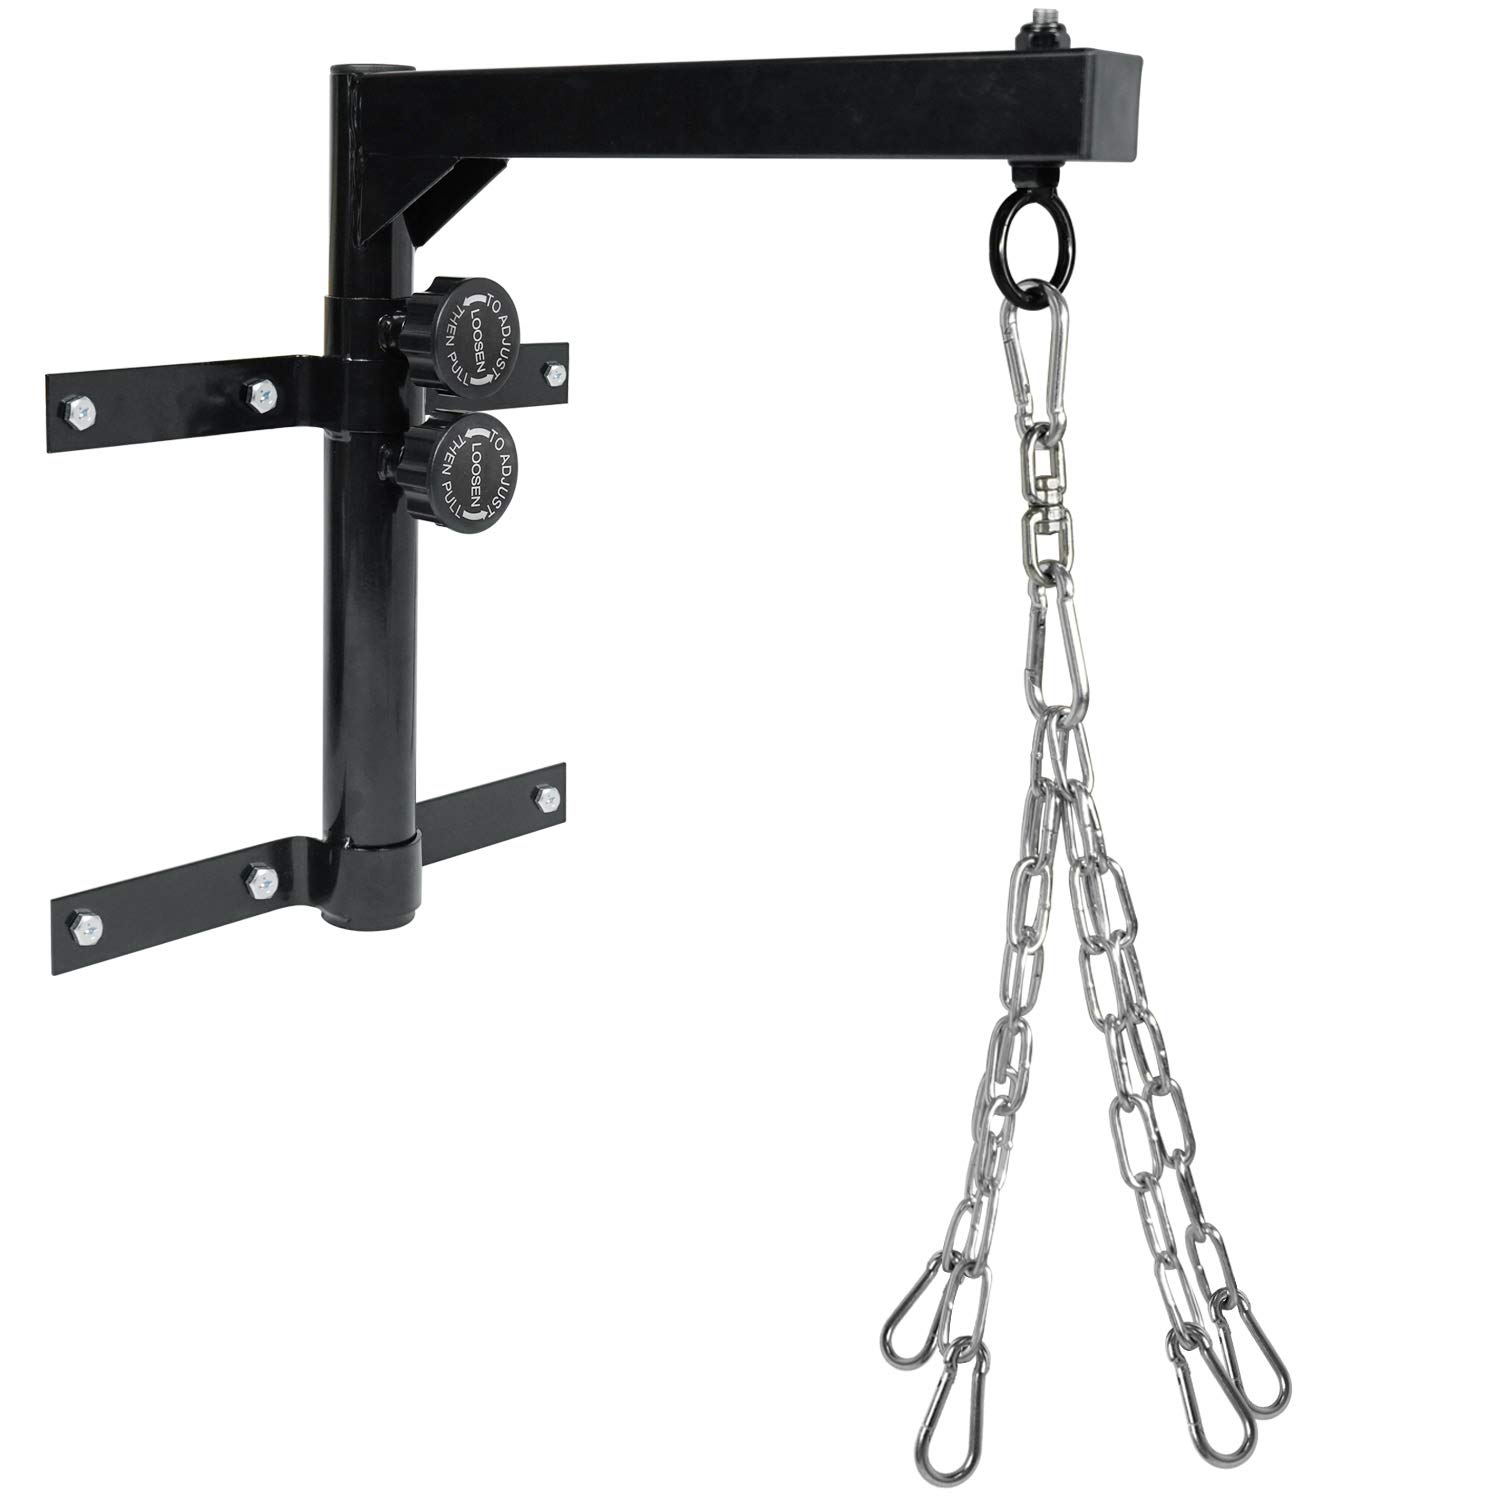 Punch Bag Wall Mount Bracket With Pull Up Bar